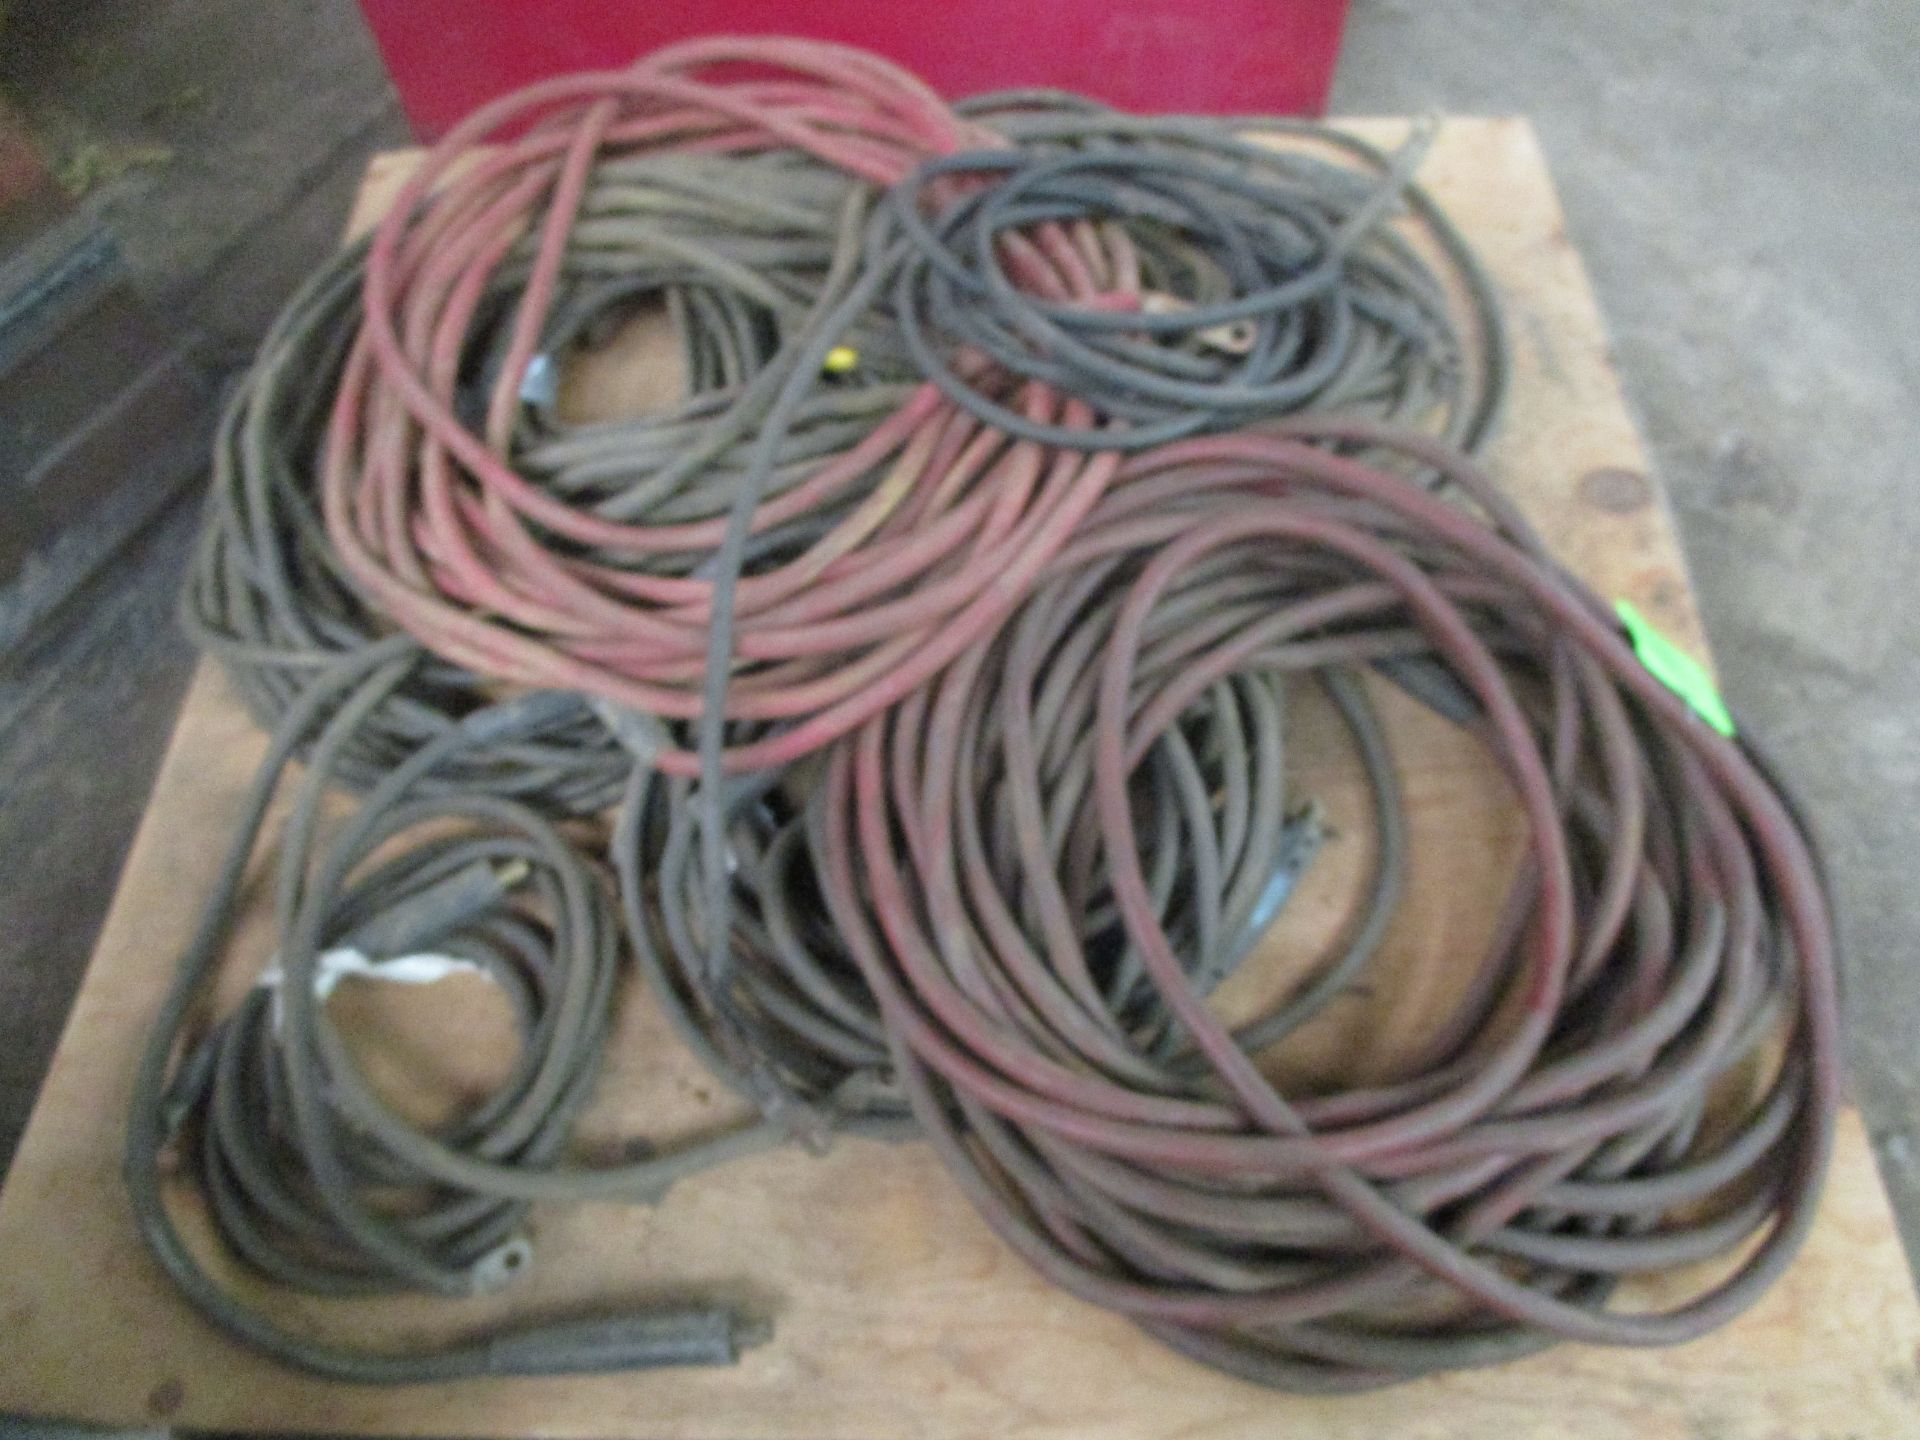 Lot of Welding Leads -Located in Cinnaminson, NJ - Image 2 of 3